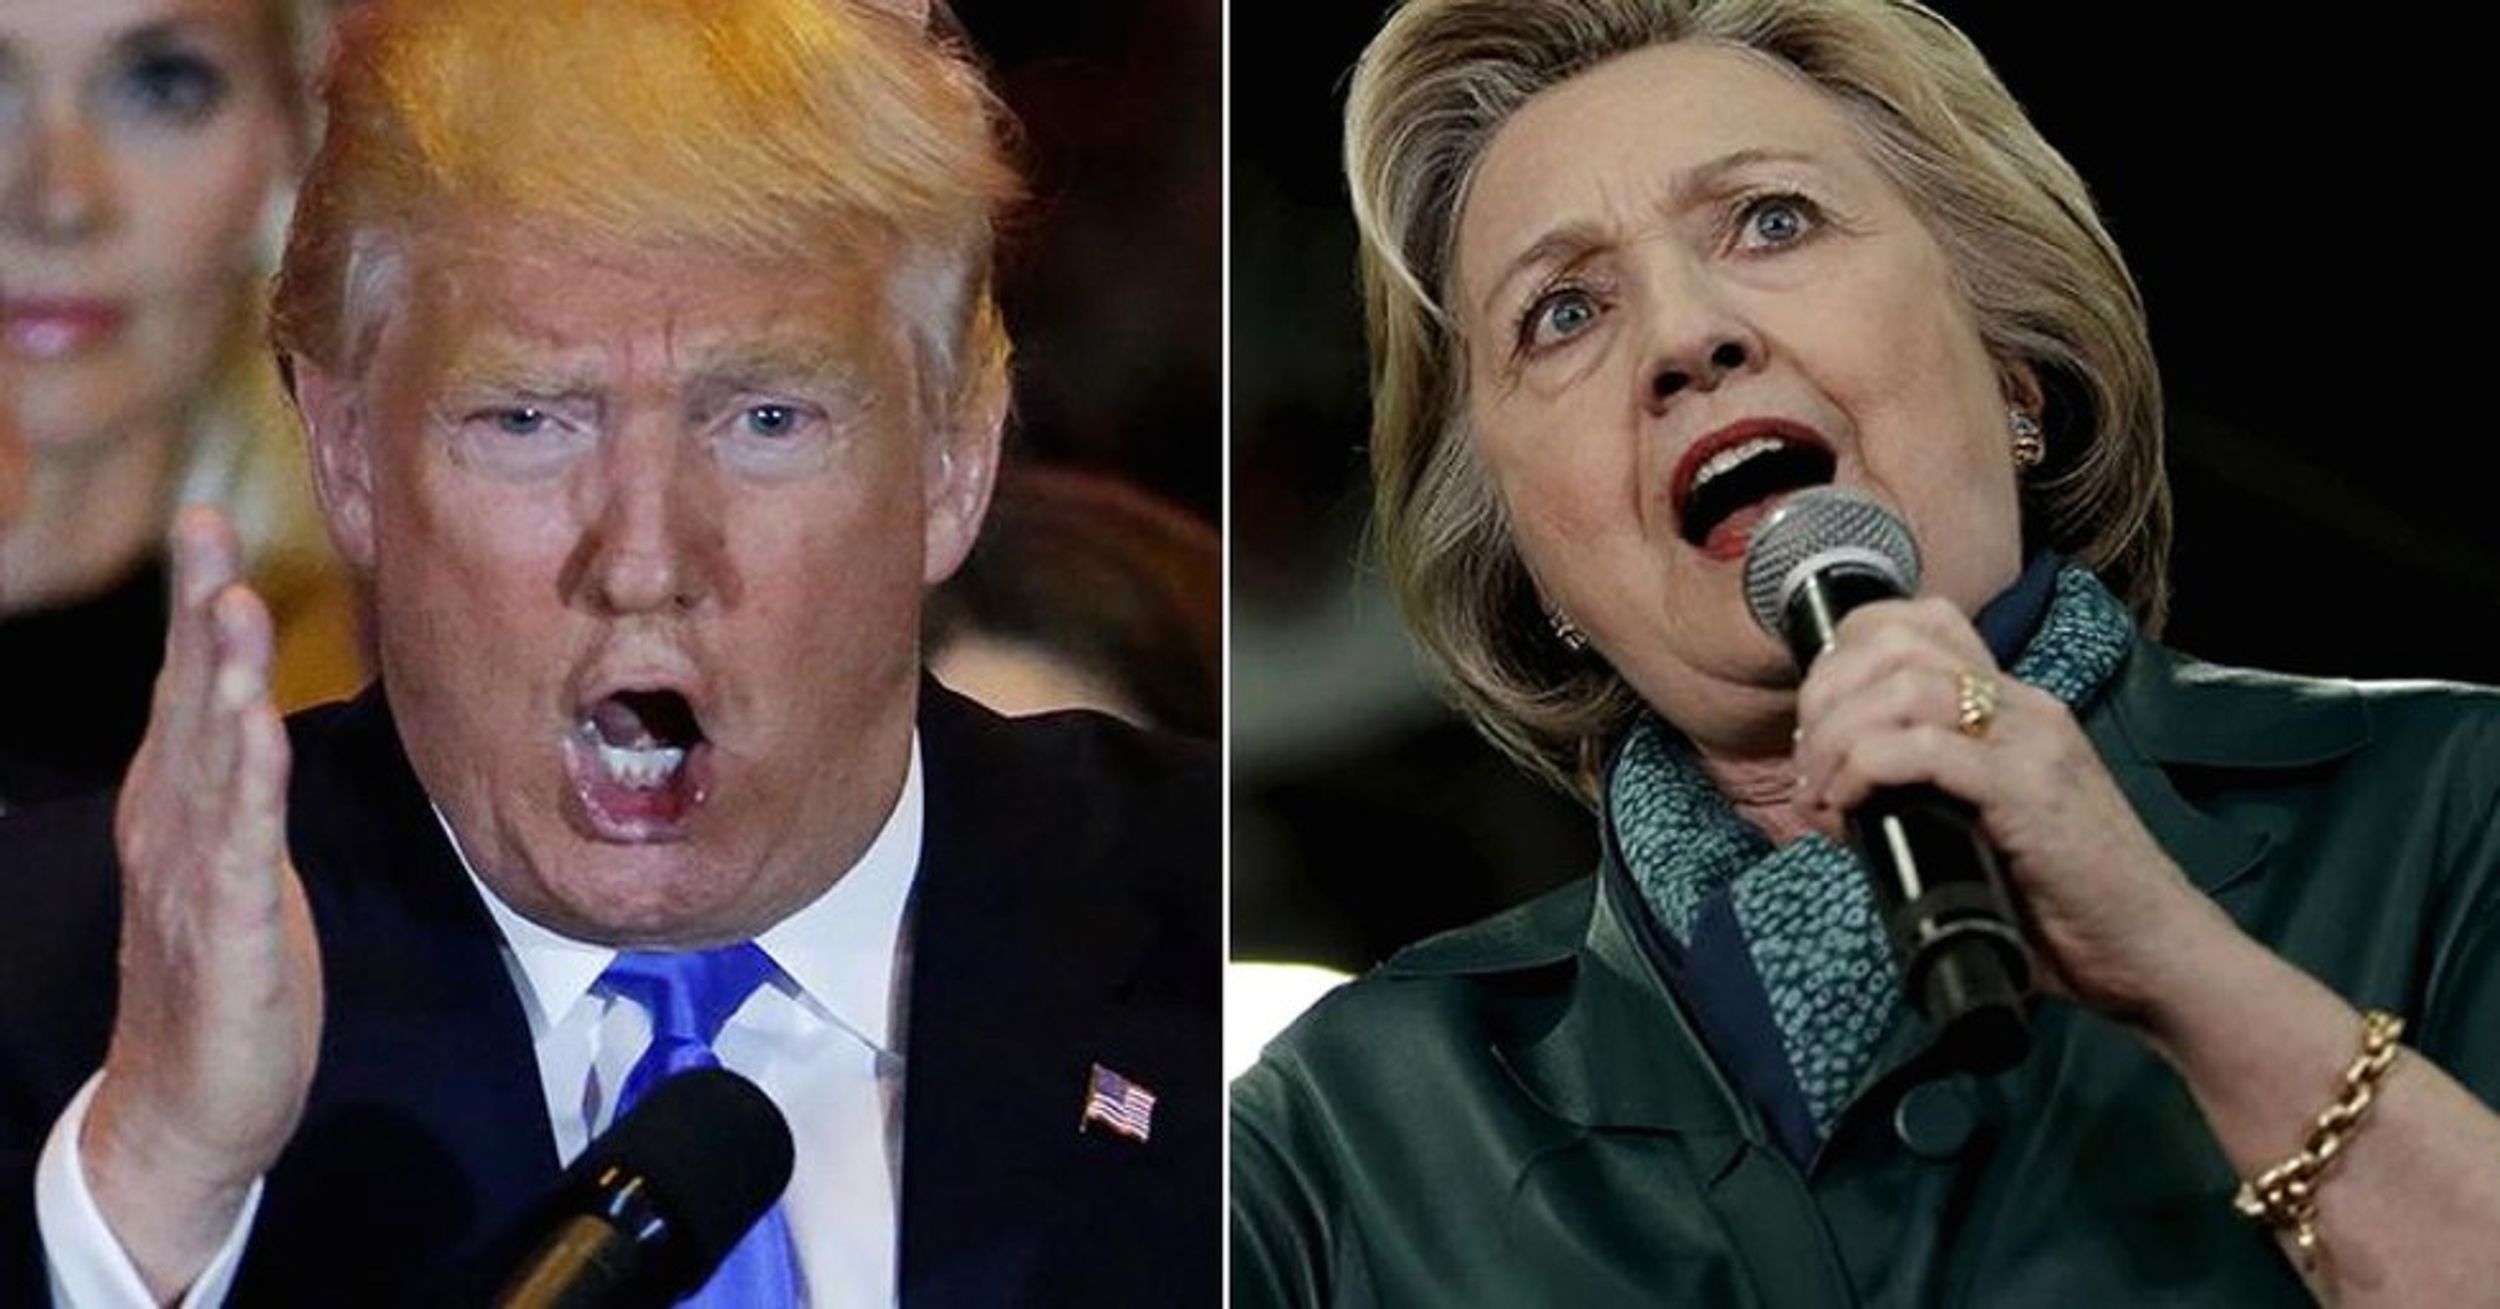 15 Ugly Pictures Of Hillary Clinton And Donald Trump